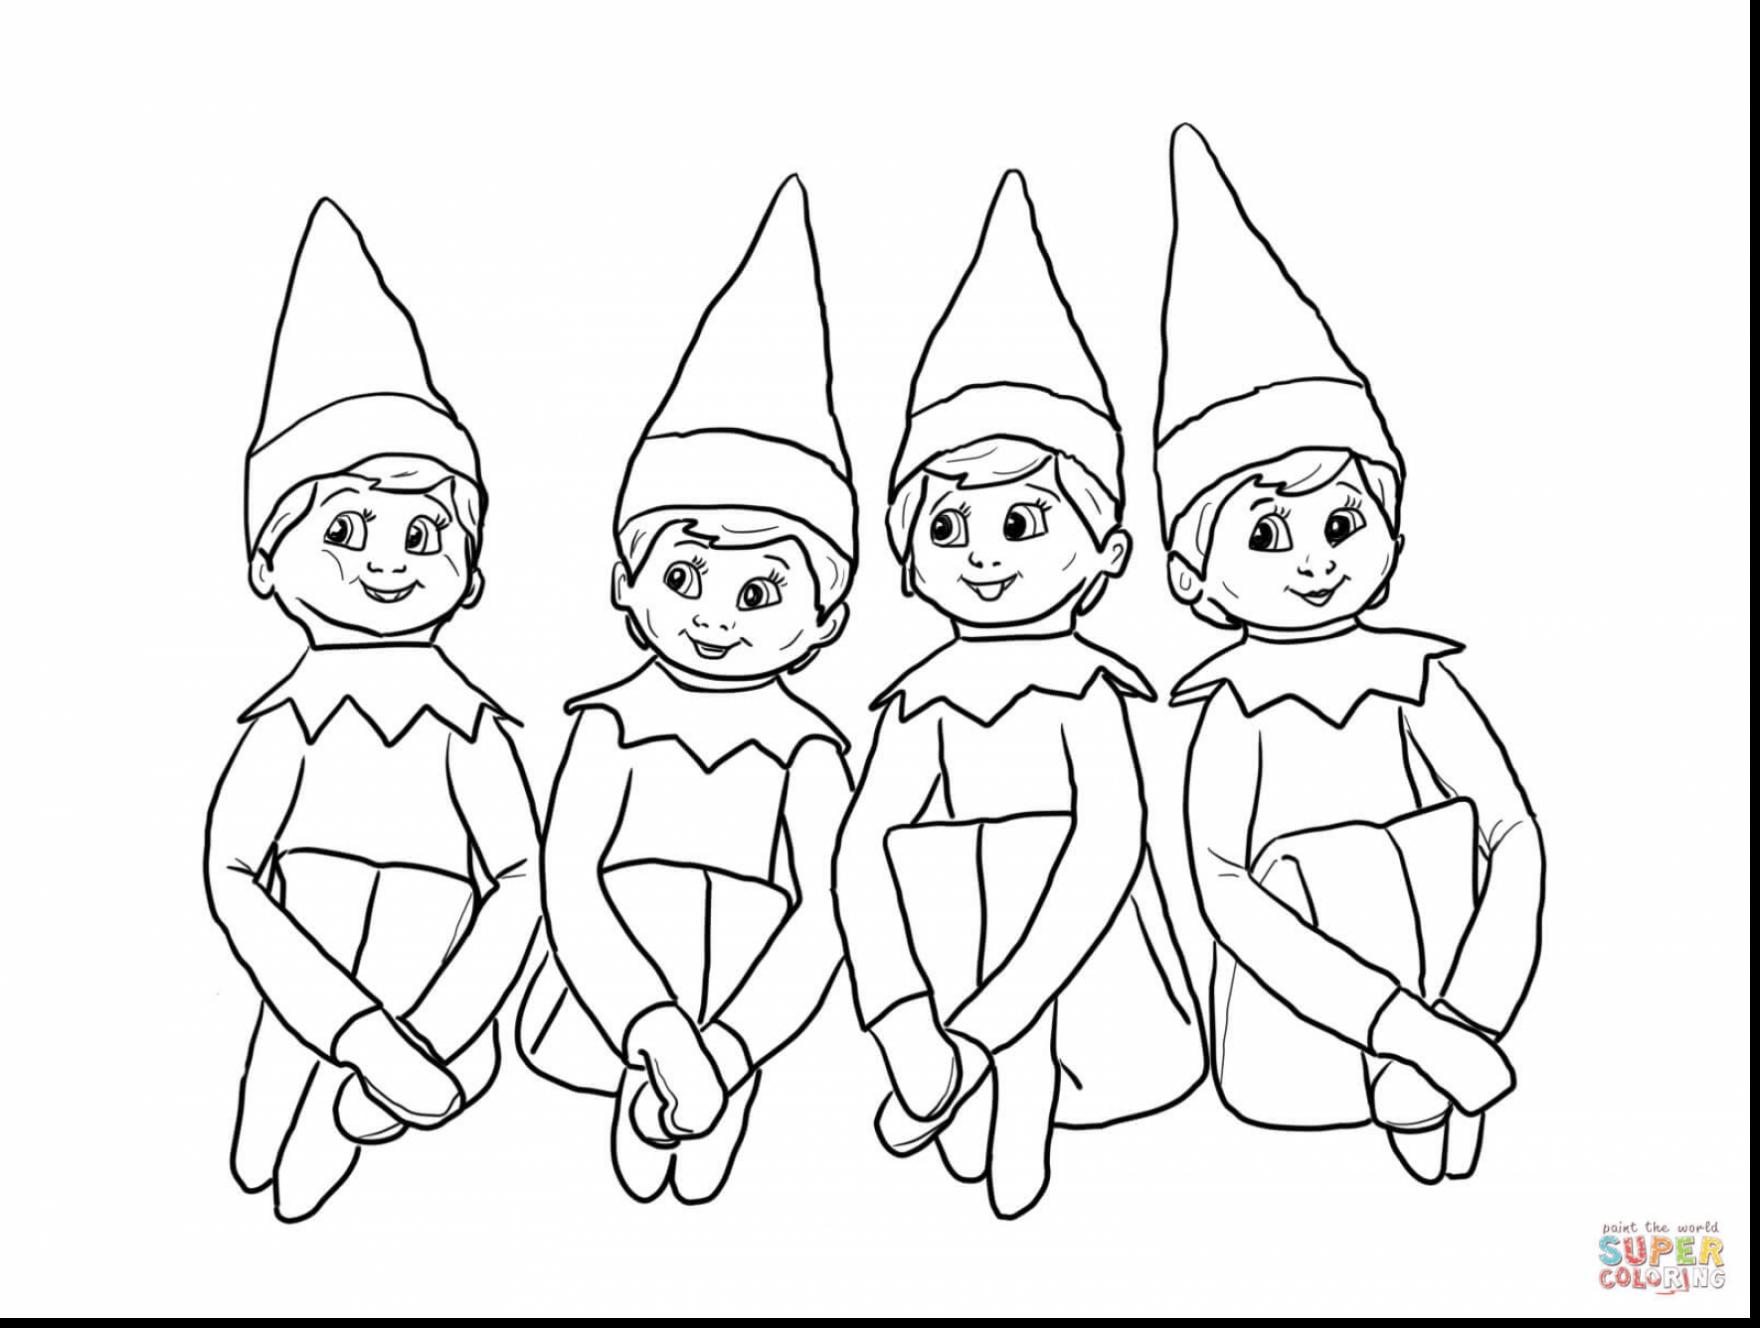 Buddy The Elf Coloring Pages at Free printable